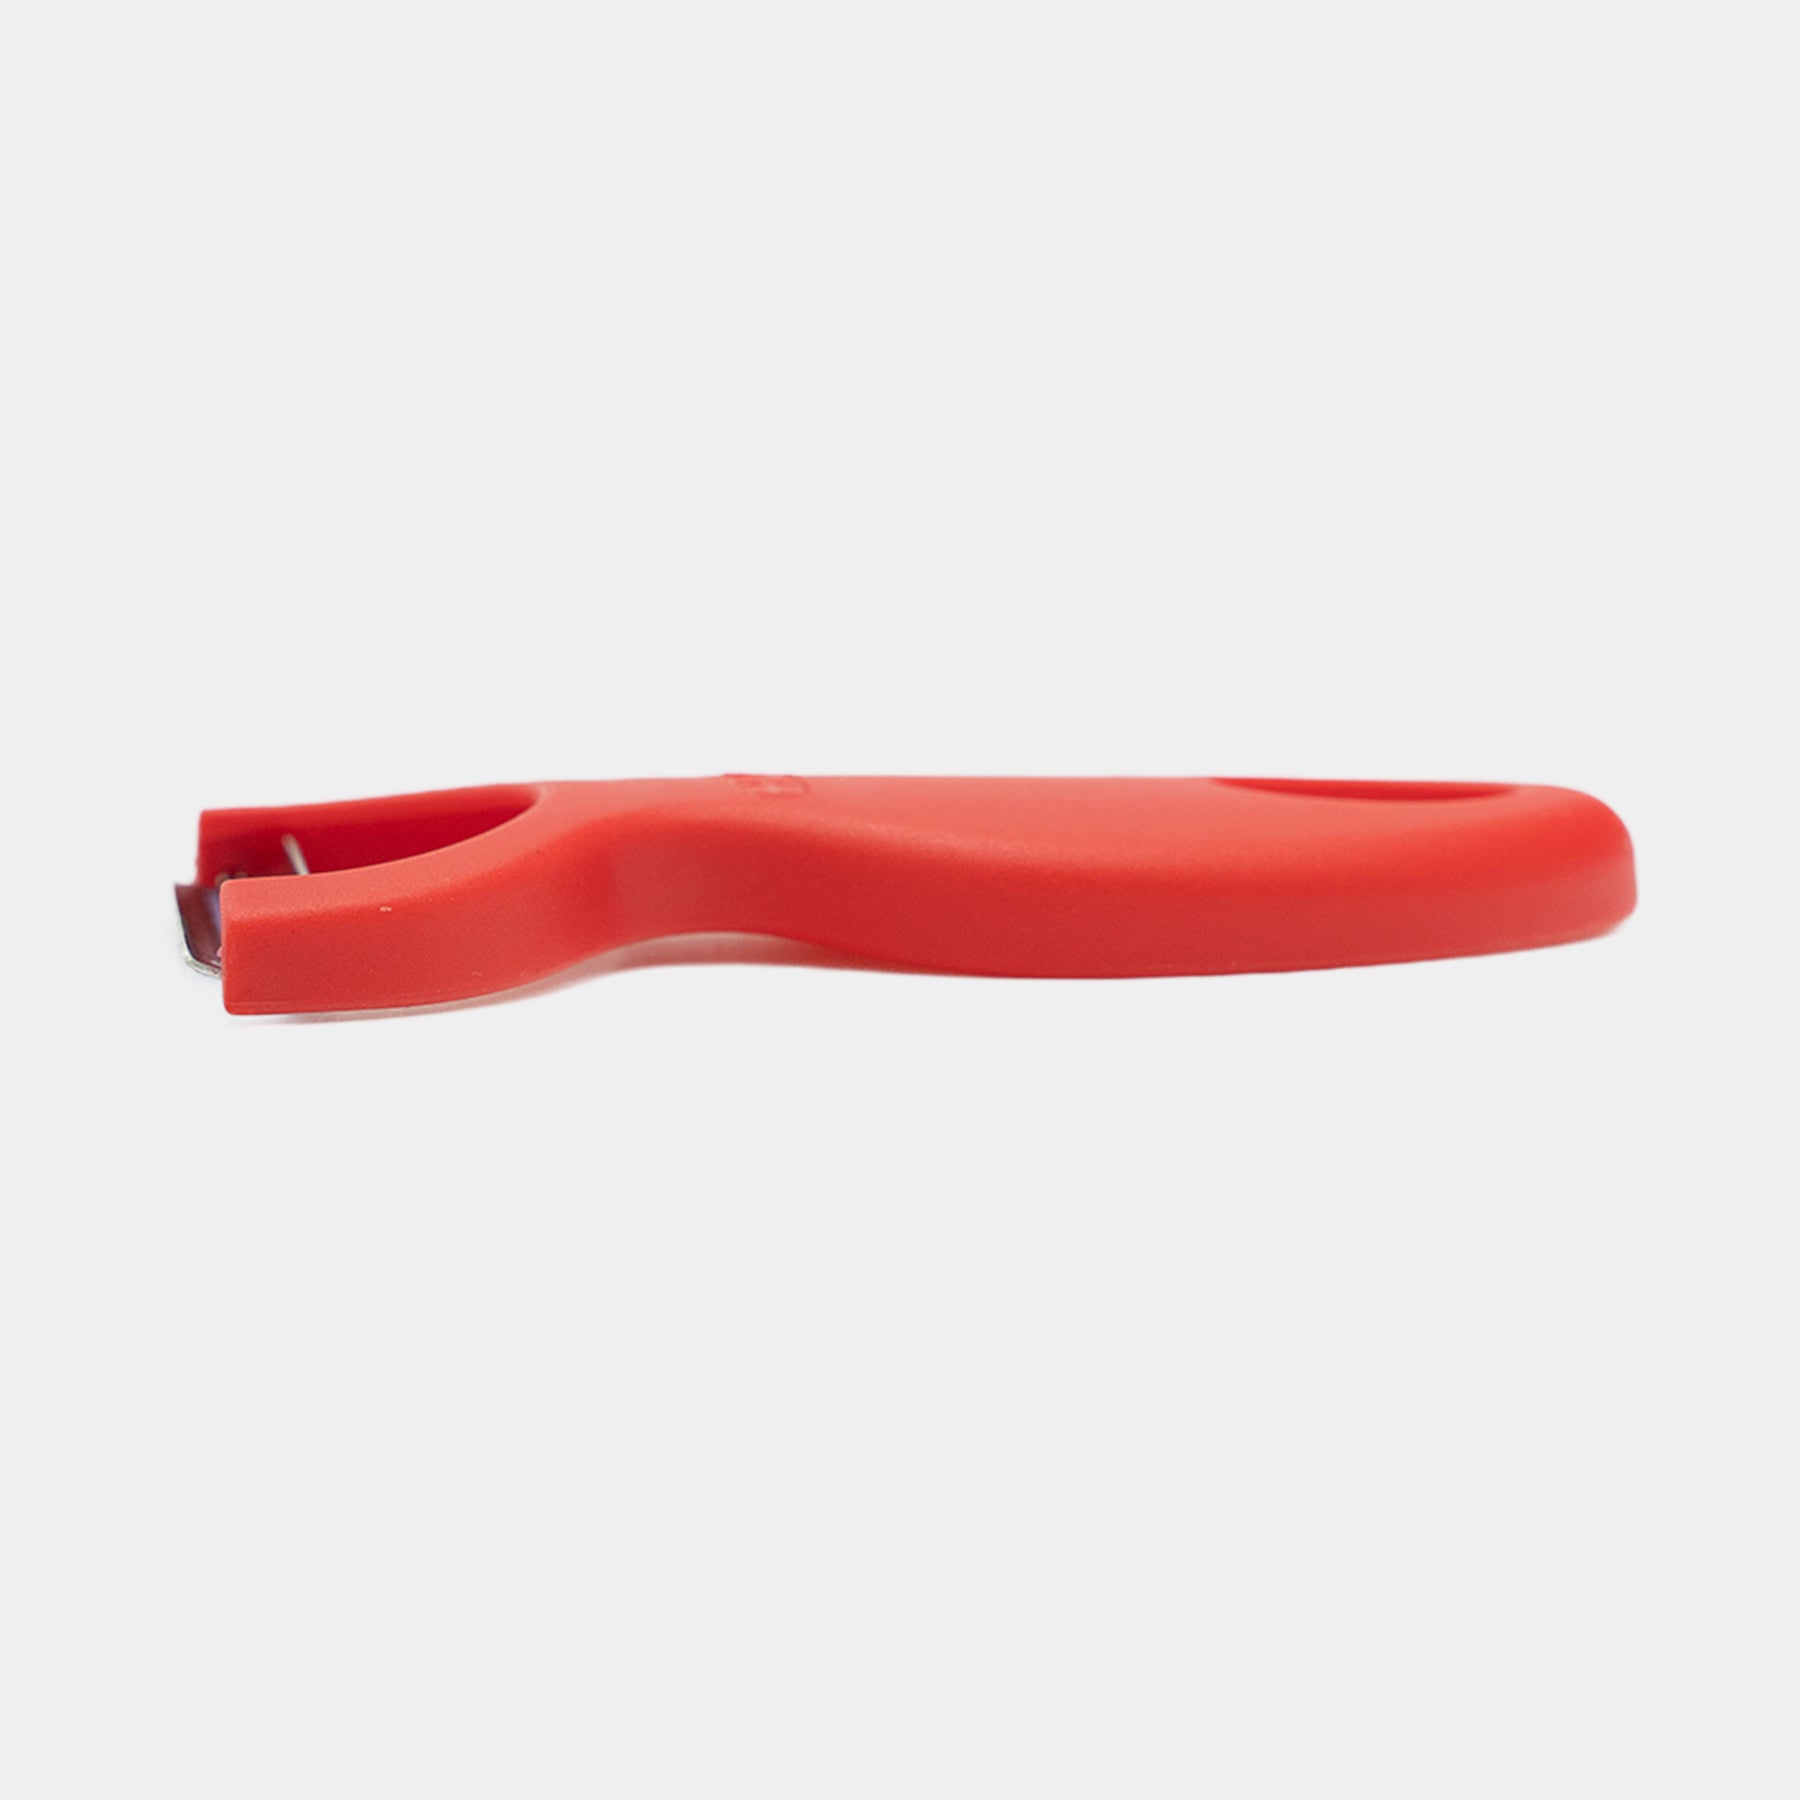 Red Peeler side view